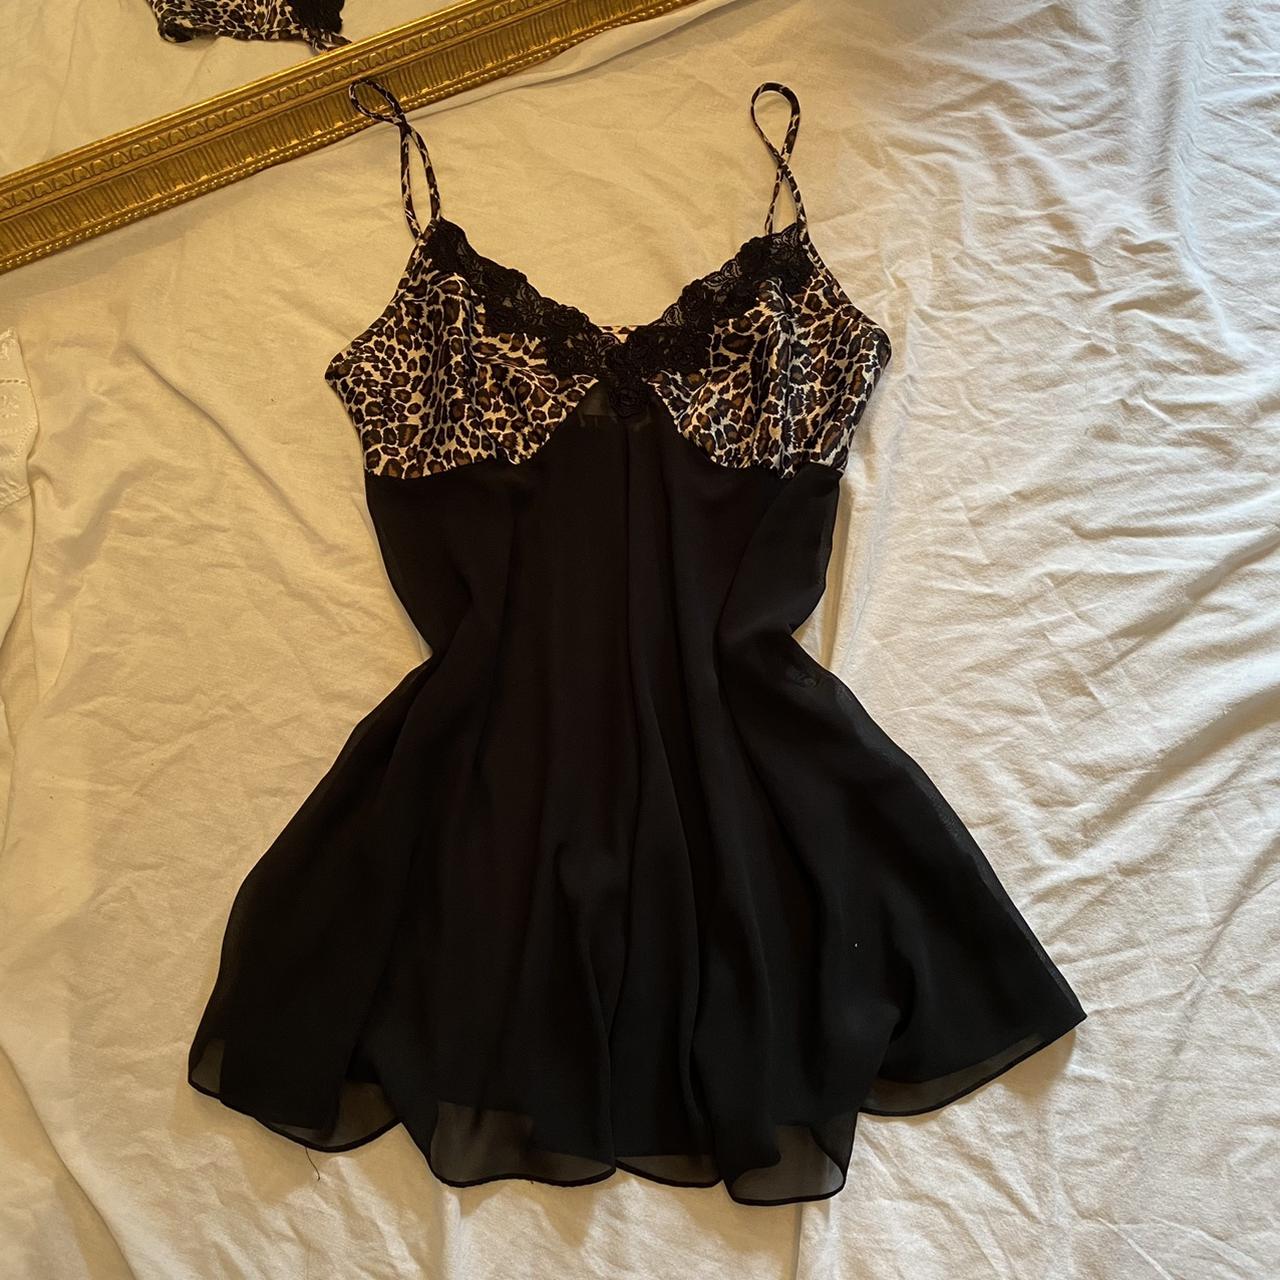 The prettiest sheer slip dress with cheetah and lace... - Depop